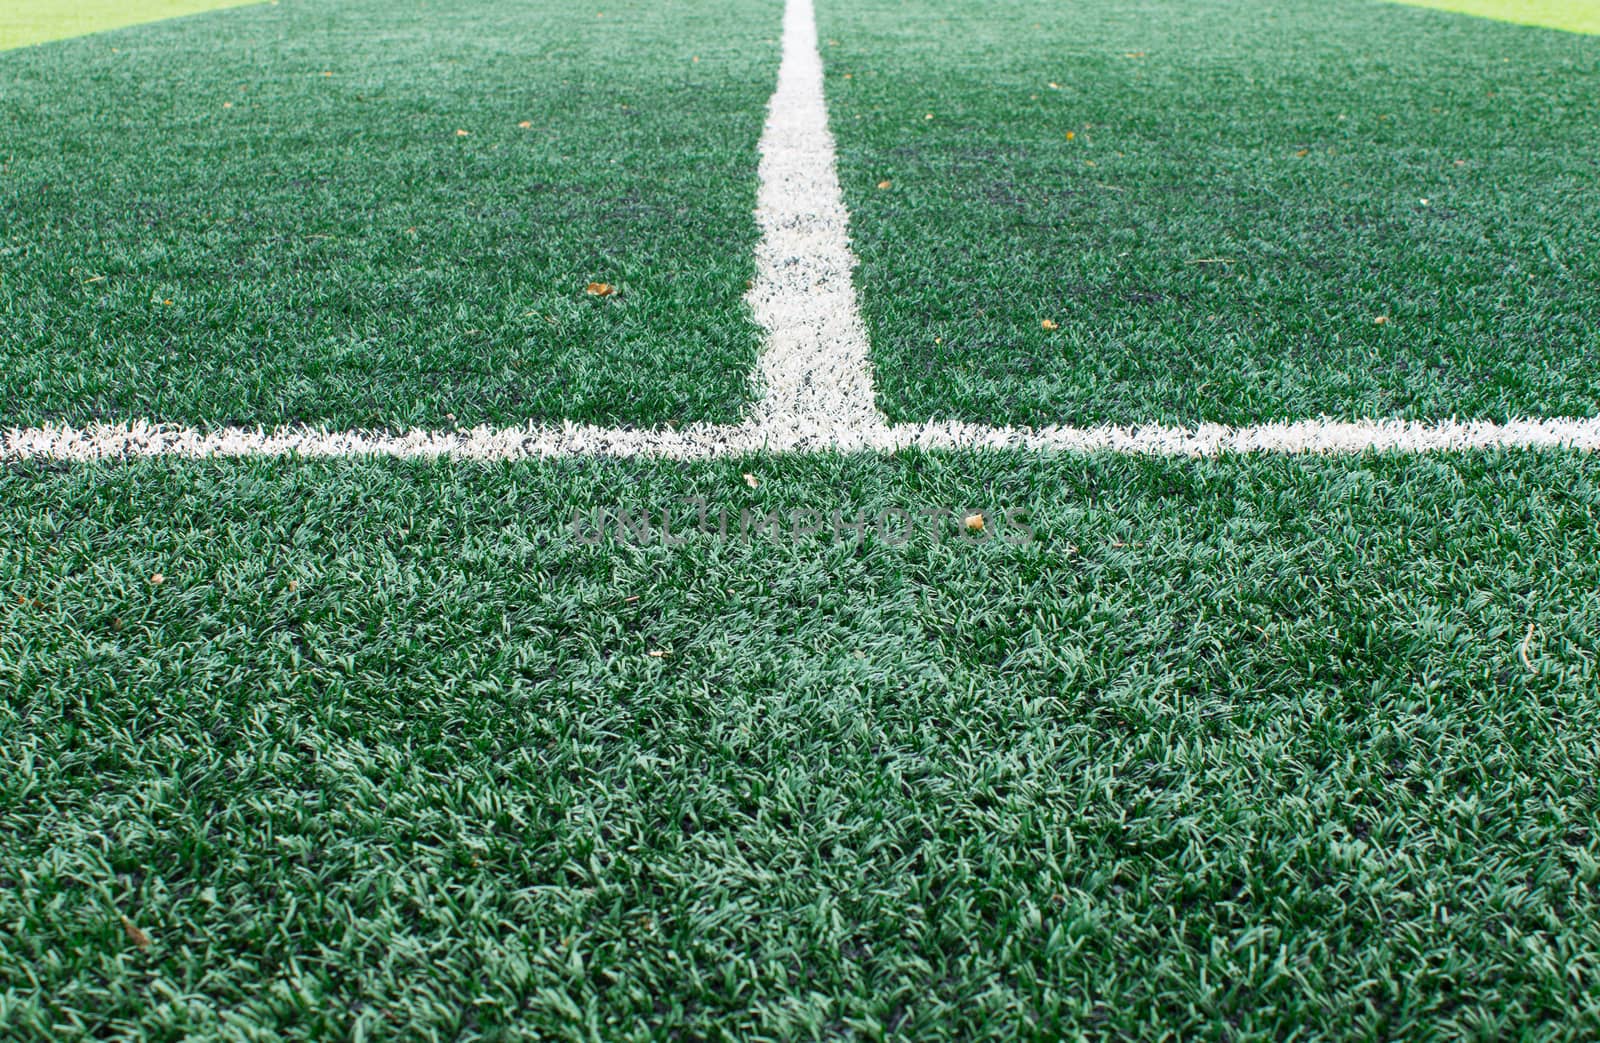 White Sideline on Football Field by steafpong